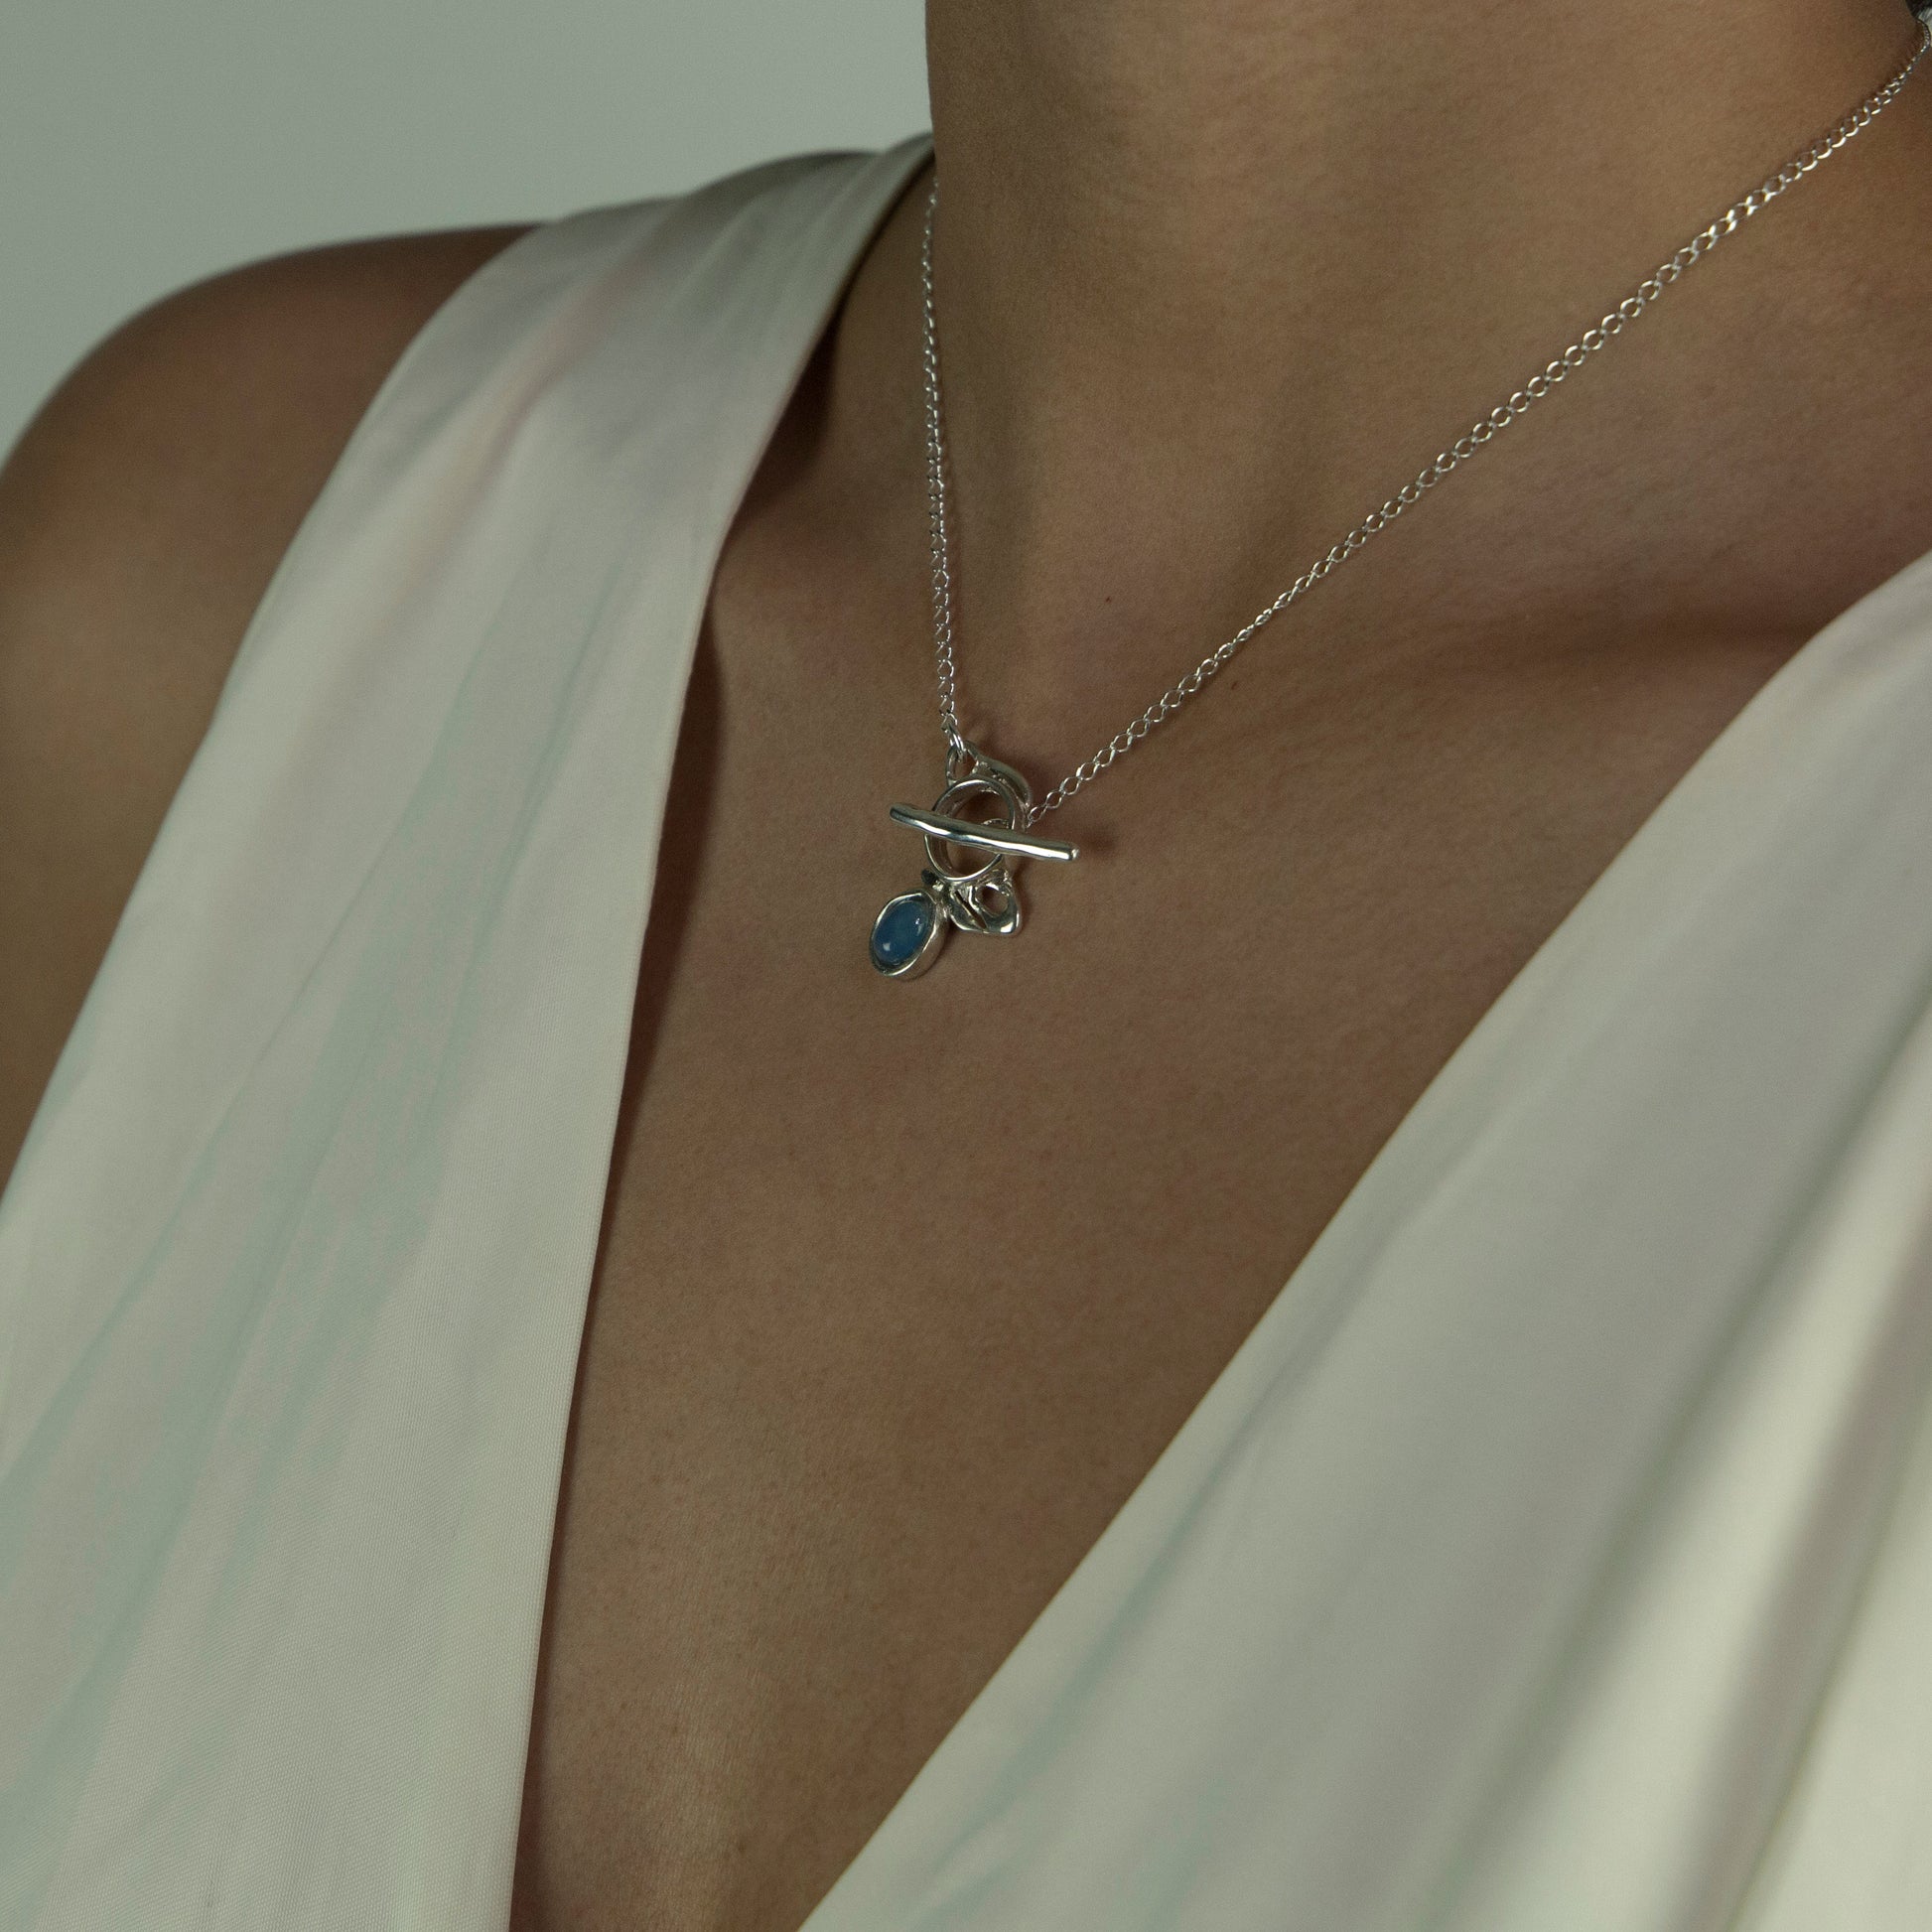 The Felicia necklace is a handmade piece made of 925 sterling silver. Its stone is a semiprecious gem called blue agate. The clasp is located on the front side and is smooth and glossy